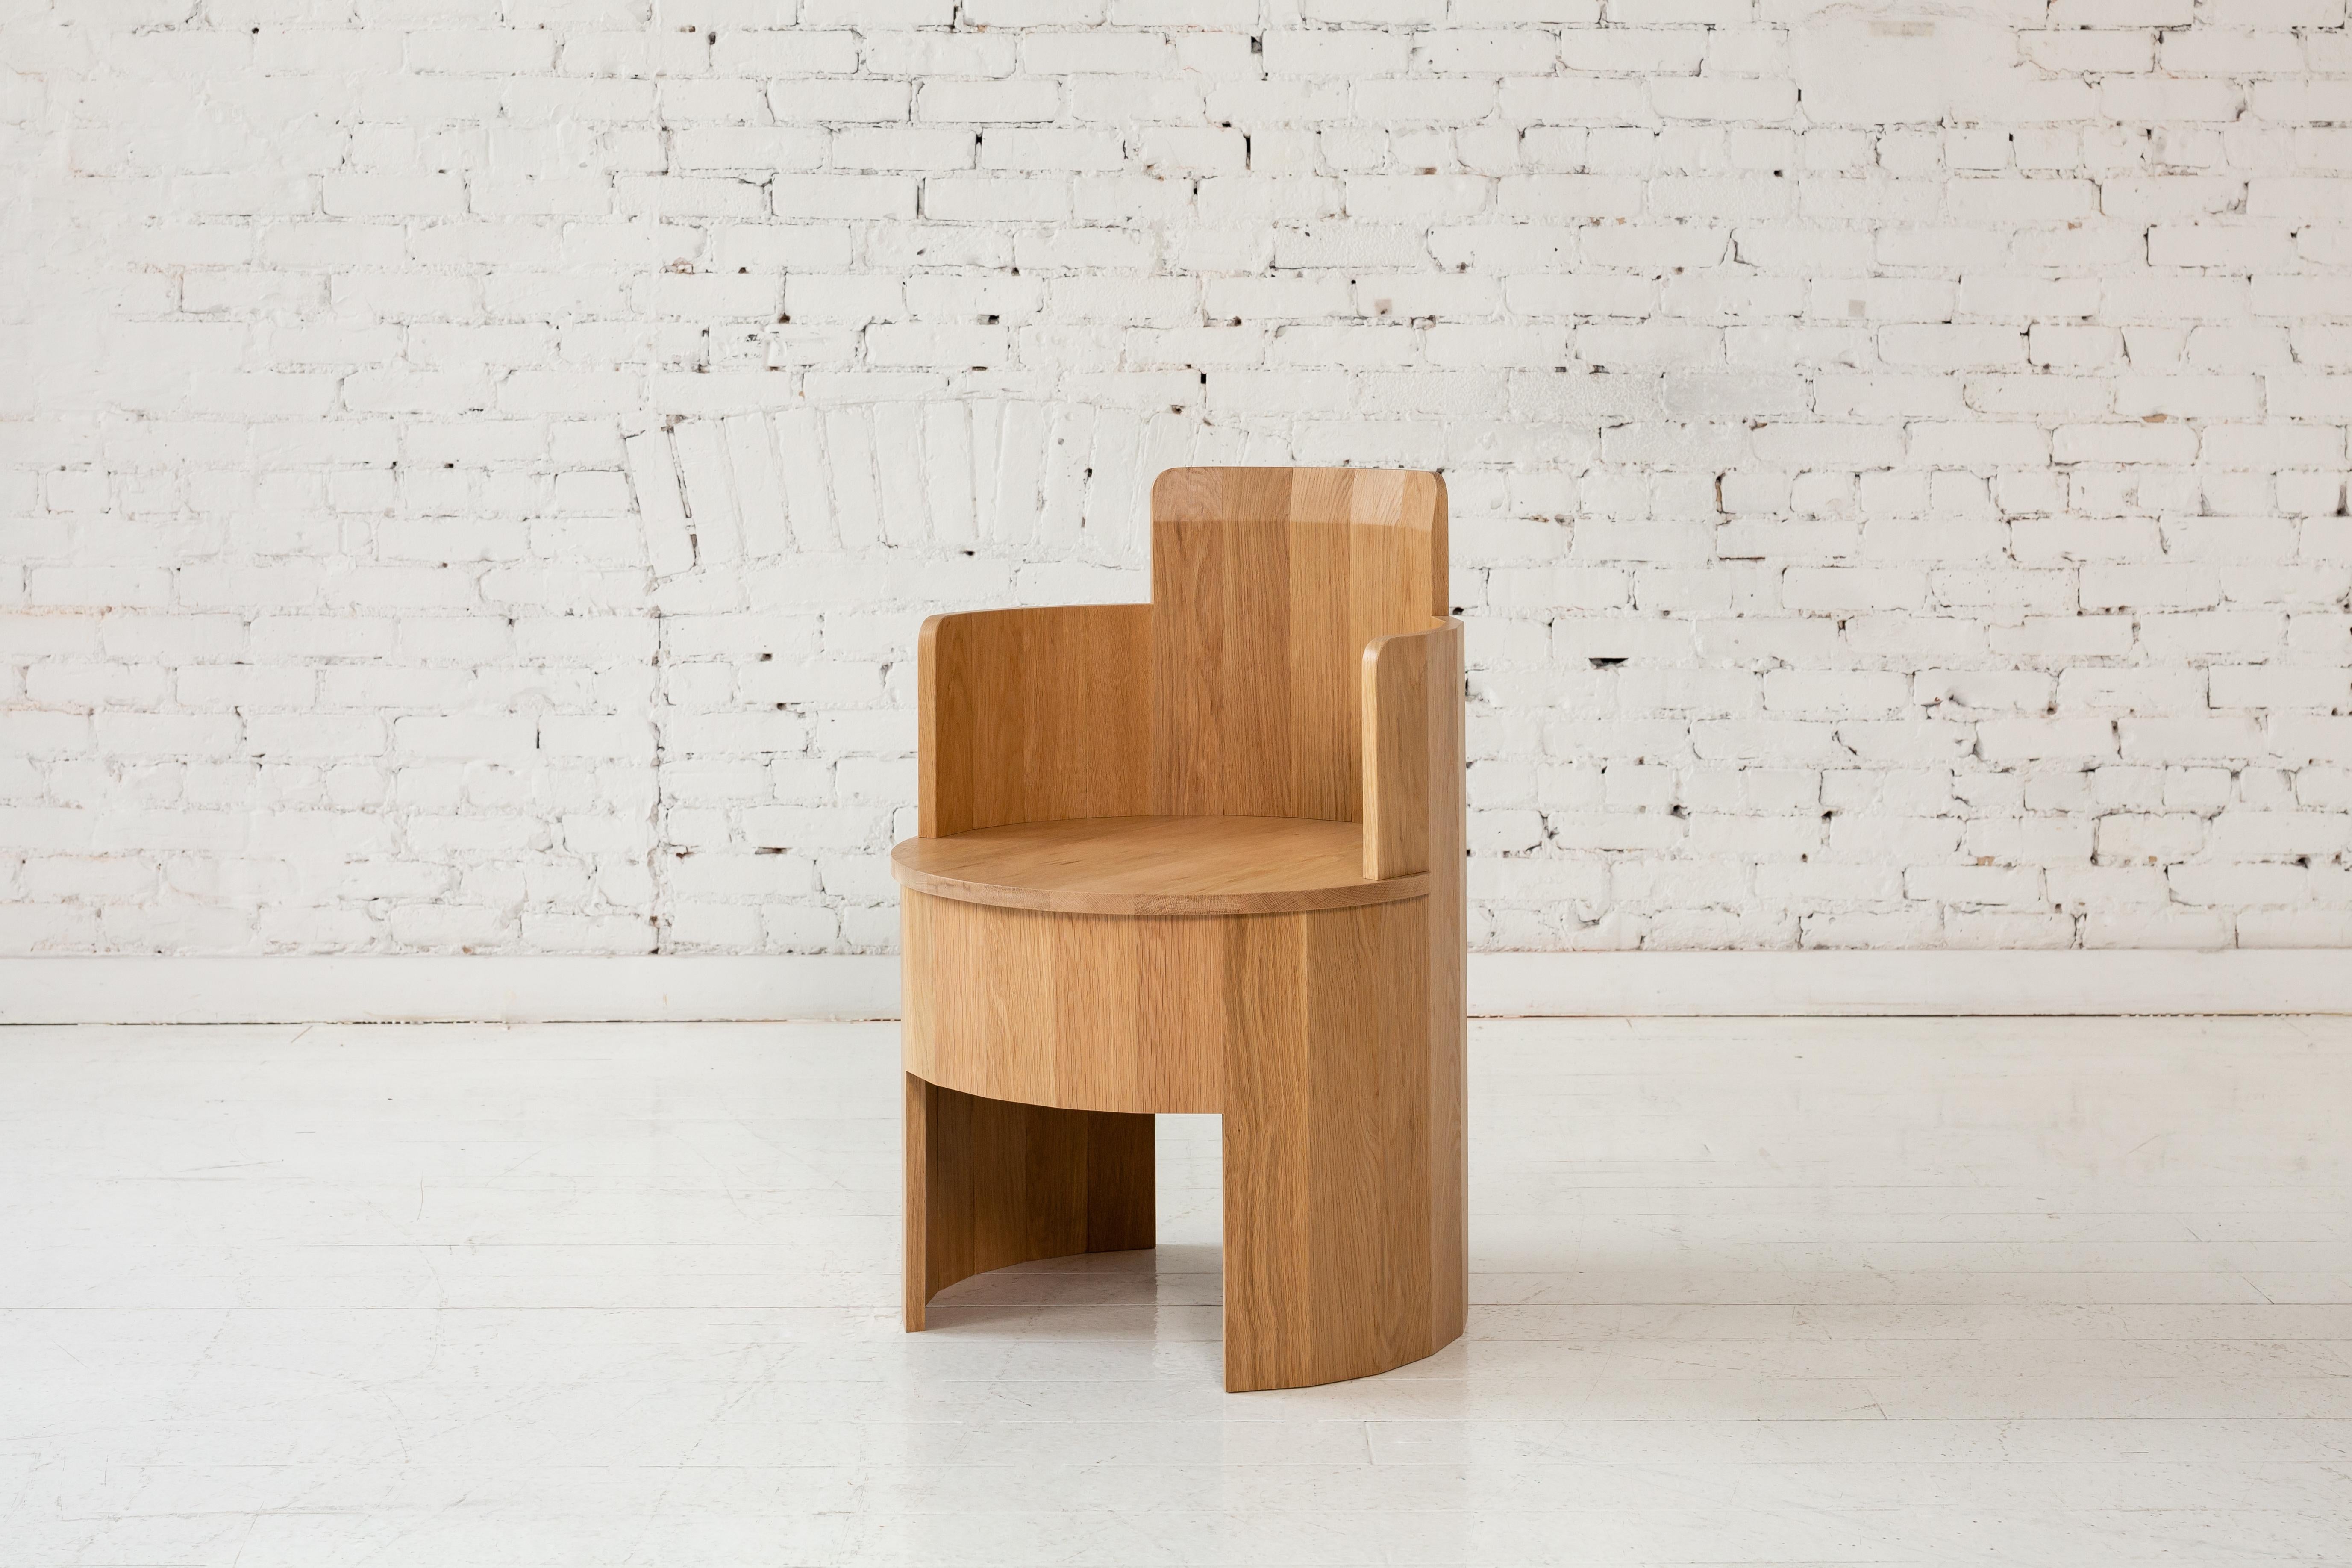 This wood side chair is a part of the new Cooperage Dining Collection. Each piece features large faceted round elements that with its namesake reference the traditional cooper's trade of making barrels.

The occasional chair table is shown in